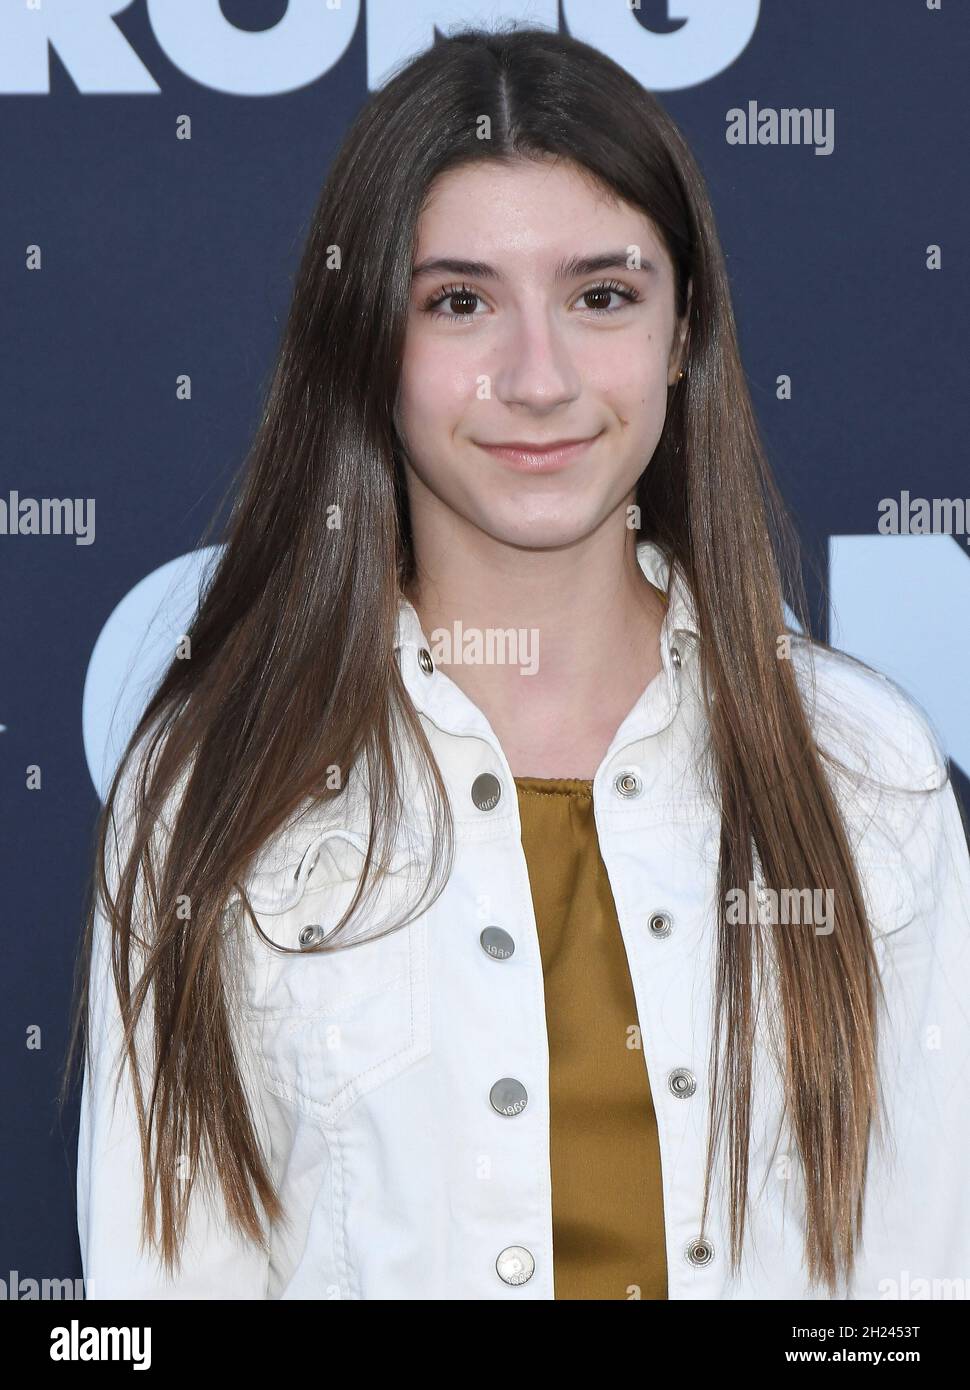 Los Angeles, USA. 19th Oct, 2021. Iara Nemirovsky arrives at Disney Studios' RON'S GONE WRONG Premiere held at The El Capitan Theater in Hollywood, CA on Tuesday, ?October 19, 2021. (Photo By Sthanlee B. Mirador/Sipa USA) Credit: Sipa USA/Alamy Live News Stock Photo